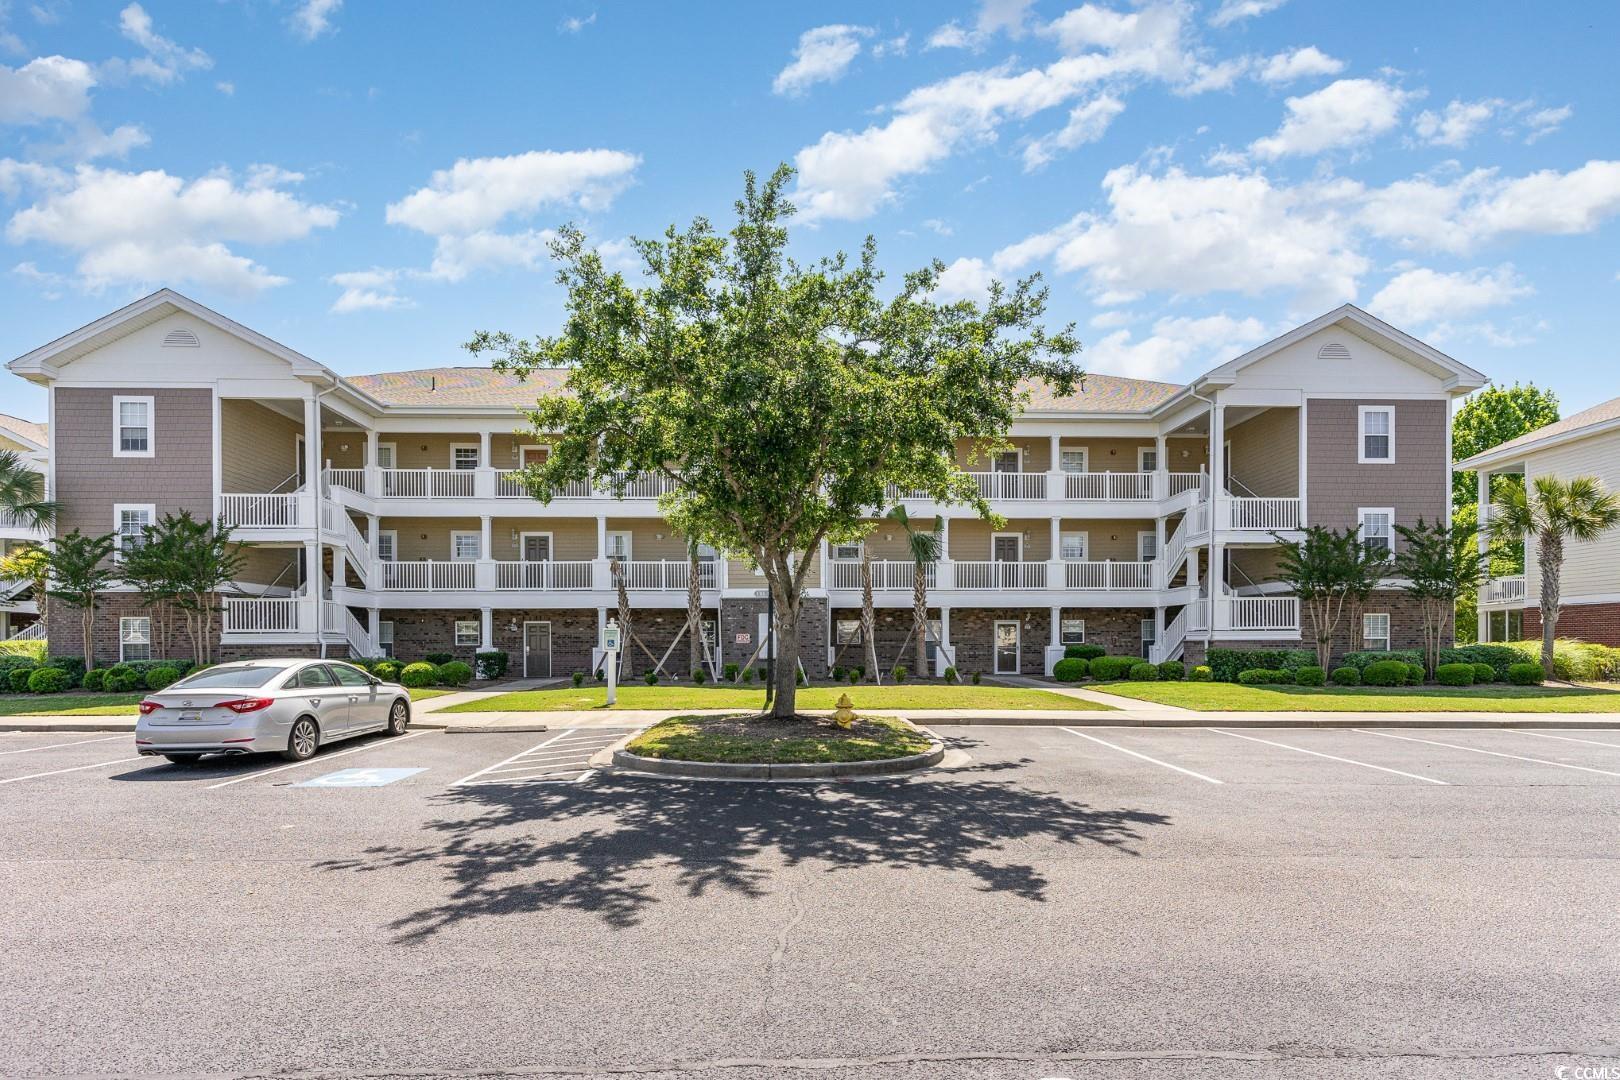 this is a fully furnished, 2 bed/2 bath condo in the desirable community of the havens at barefoot resort with a fabulous view of the 9th hole of the greg norman golf course from the private balcony. this unit is in excellent condition and has not been rented in several years. it features lovely hardwood laminate flooring that was installed in 2019 and has both a new hvac system and water heater that were acquired in 2022. the unit is accentuated by the gorgeous hues on the wall, painted in 2020. the large window in the master bedroom and the glass door transitioning to the balcony bring in streams of natural light. this delightful, spacious condo makes a terrific investment opportunity, vacation spot, or even residence!  barefoot's 2,300 acre resort has so much to offer including 4 championship golf courses with 2 multi-million dollar club houses, an awesome driving range w/ an adjacent bar & grill, greg norman golf academy, a private beach cabana w/ seasonal complimentary shuttle service to/from & gated parking lots, a 15,000 sqft salt water pool on the icw, full service marina, walking trails, restaurants and so much more! barefoot resort is only a mile from the ocean, right outside of barefoot landing and close to all of the shopping, dining, entertainment, golf, area attractions, the beautiful atlantic ocean w/ 60 miles of white sandy beaches and all that the beach has to offer.